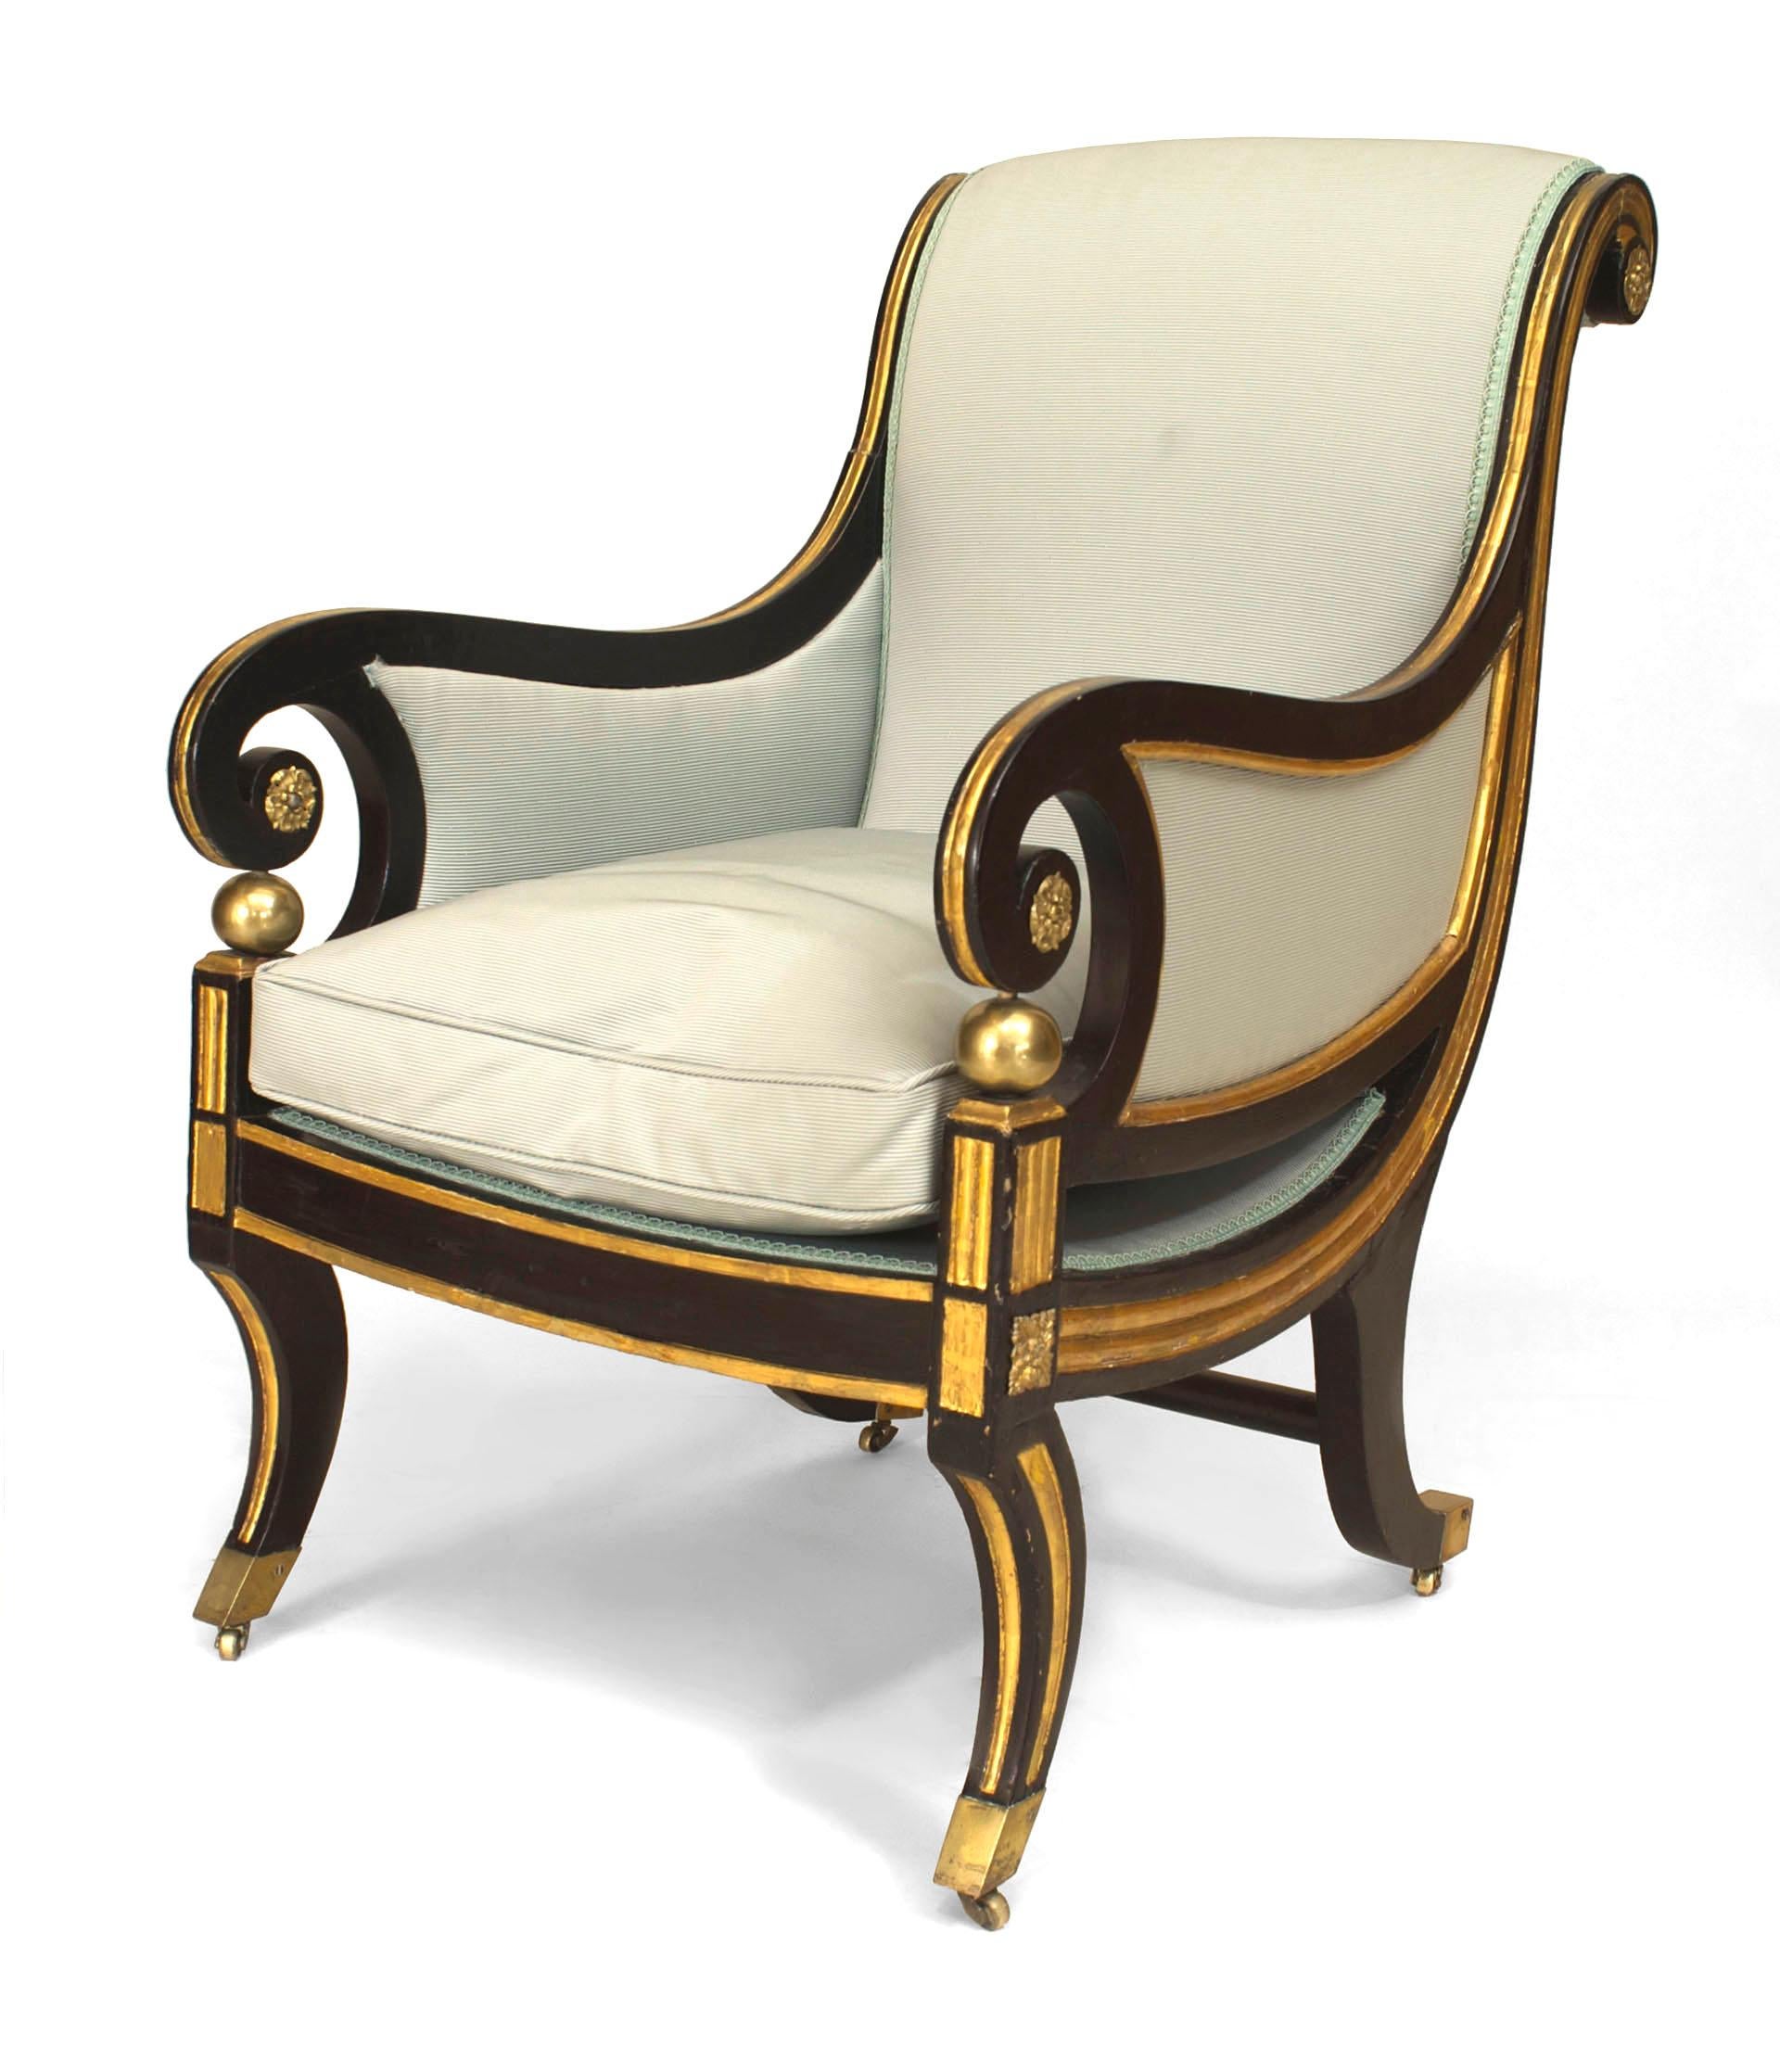 Early nineteenth century cream upholstered club chair composed of ebonized and gilt trimmed wood with a sleigh back and brass trimmed curlicue arms resting upon gilt spheres with four curved legs and an apron adorned with a brass decal.